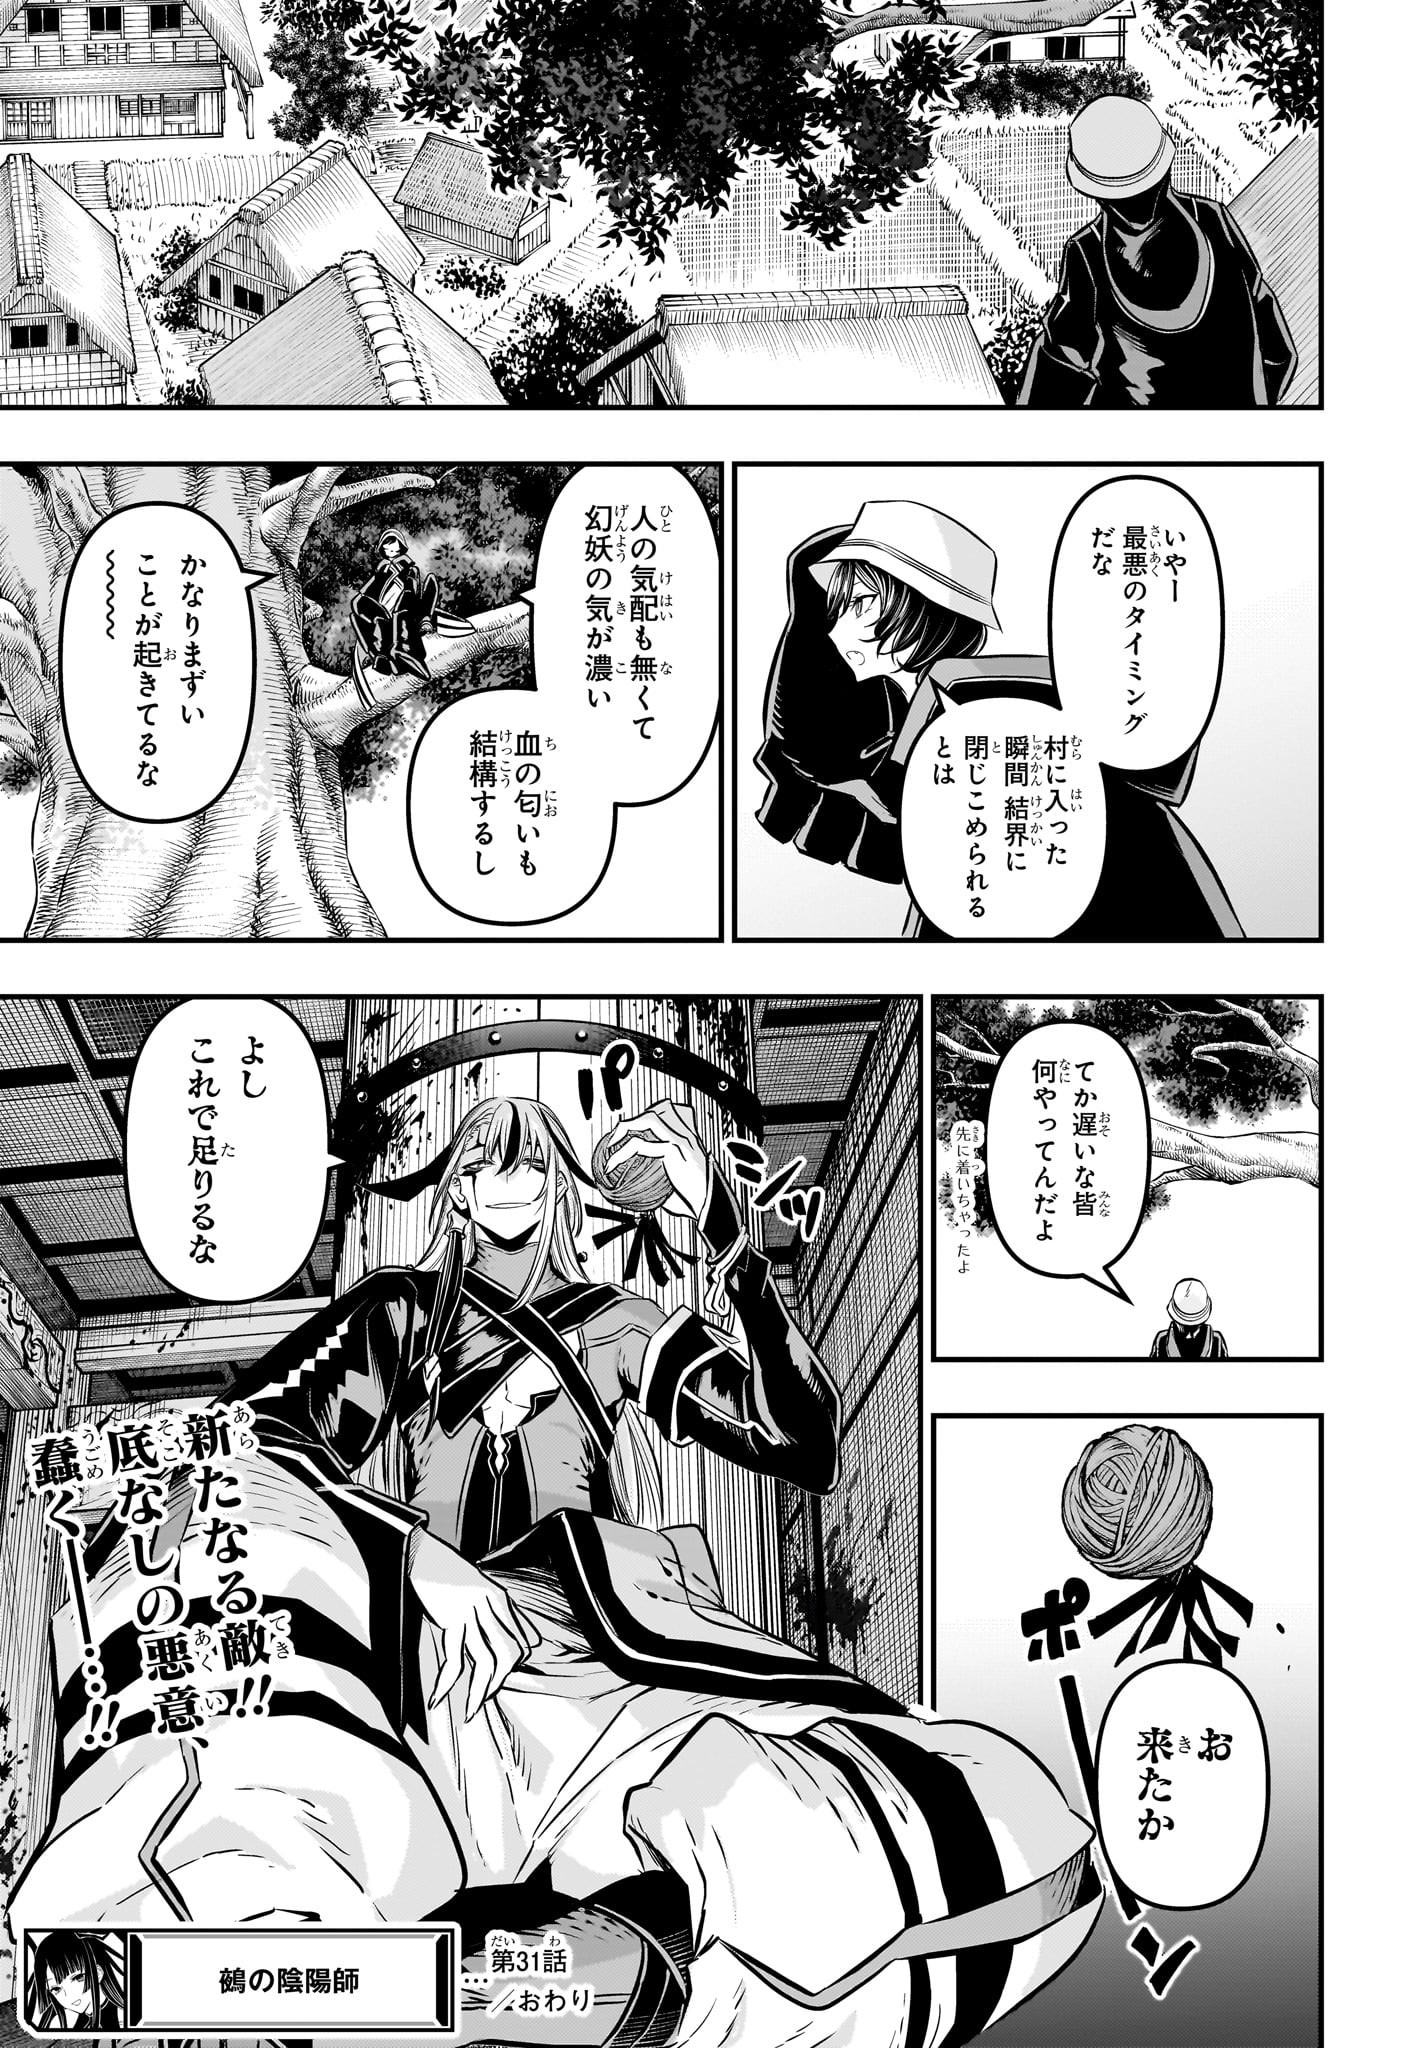 Nue no Onmyouji - Chapter 31 - Page 21